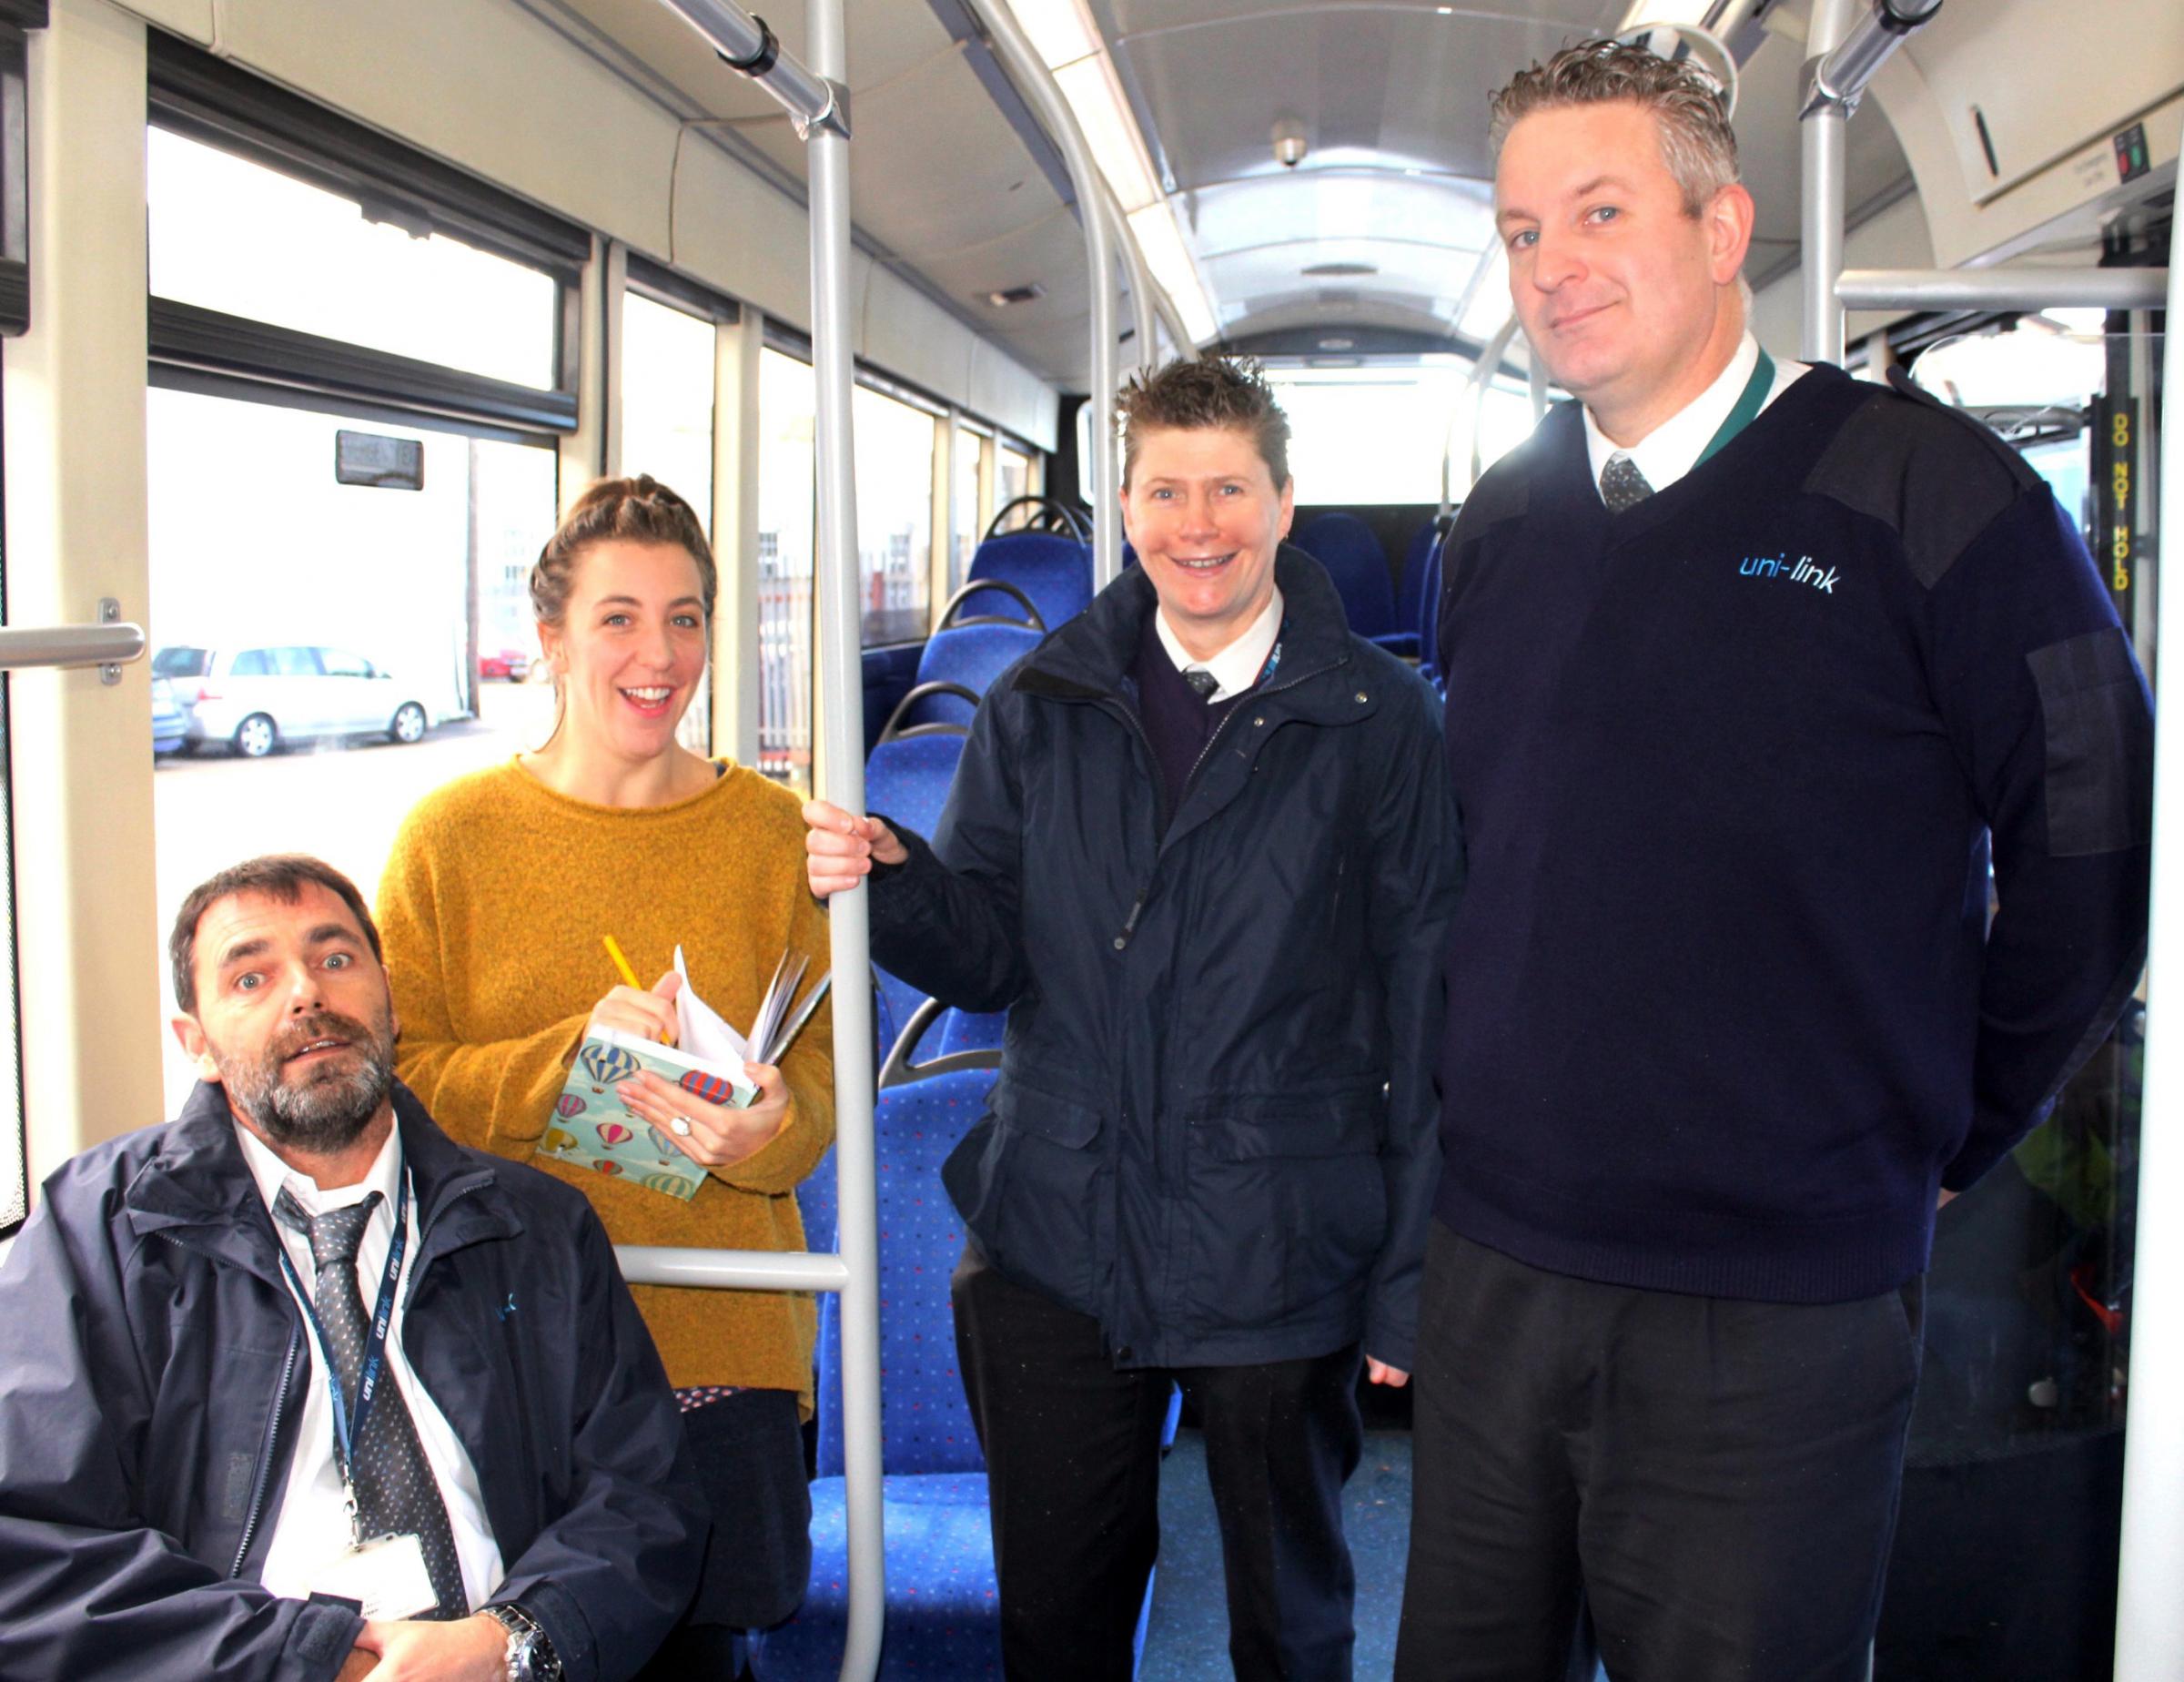 Southampton writer turns city's bus drivers into poetry - Daily Echo